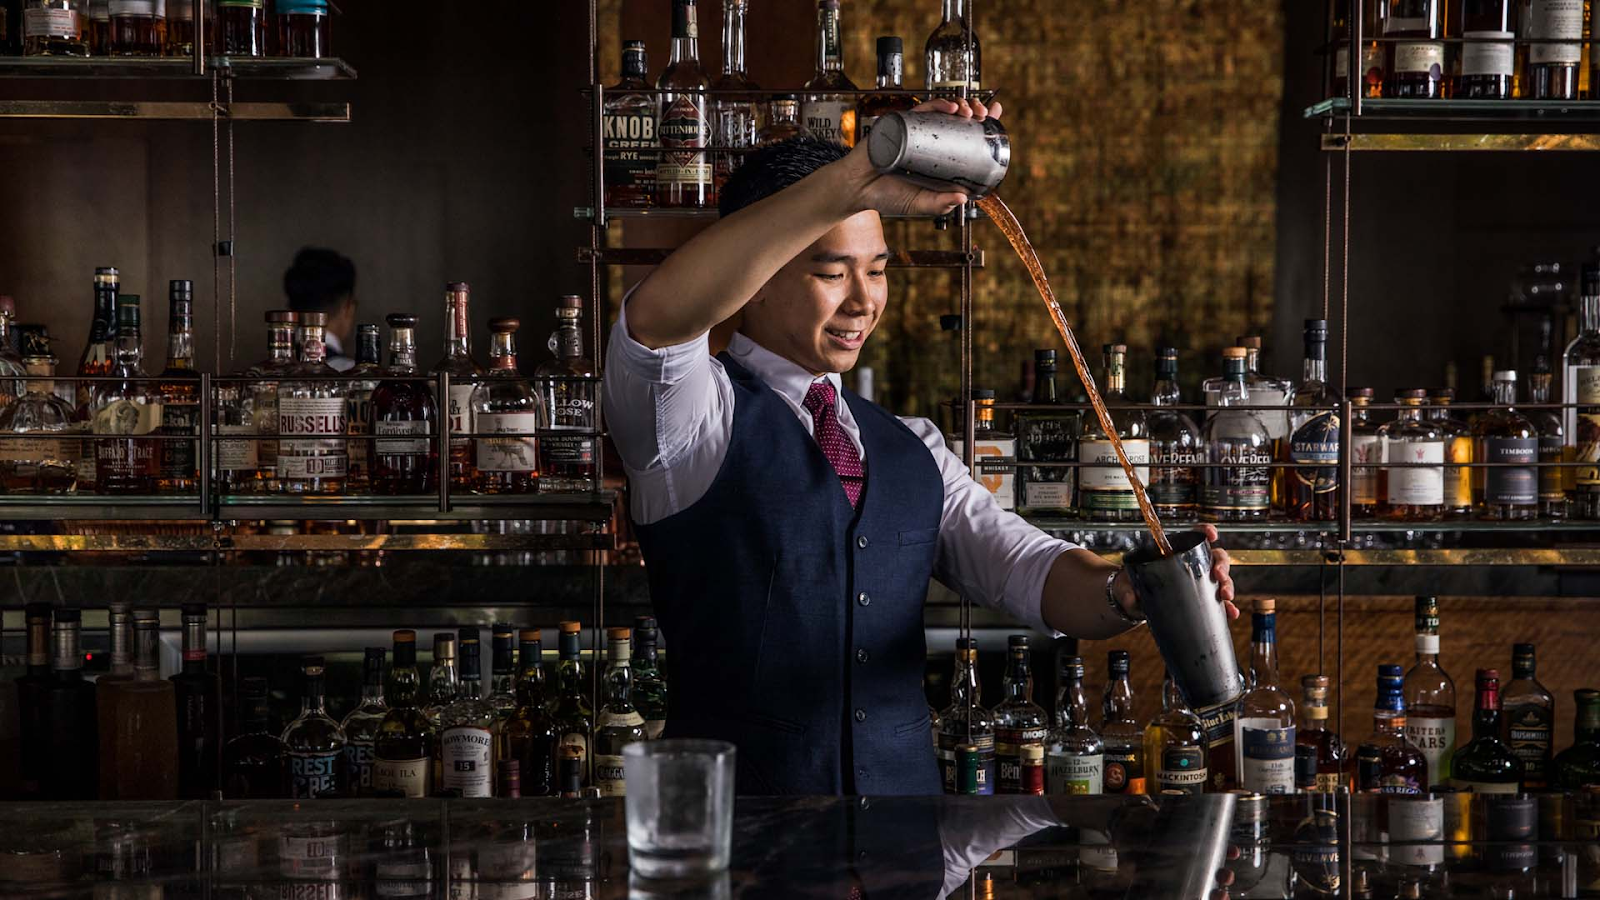 As a bartender, you will interact with guests from all walks of life, so excellent customer service skills are essential. You must also be knowledgeable about the products you’re selling, have good multitasking skills, and be able to handle multiple orders at once. 
